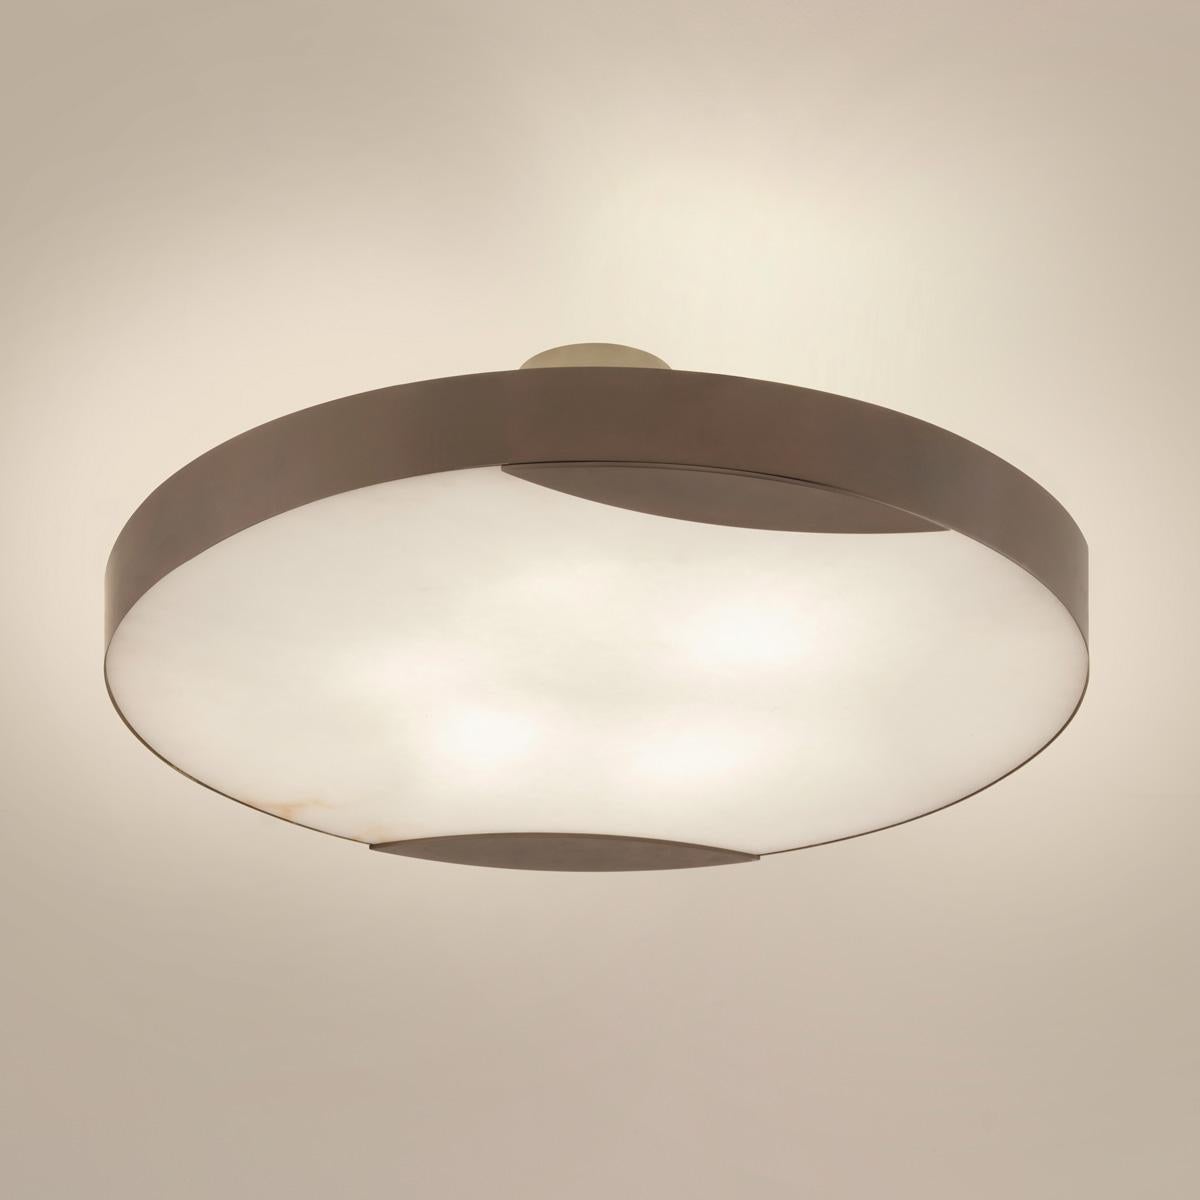 Cloud N.1 Ceiling Light by Gaspare Asaro-Polished Nickel Finish For Sale 2